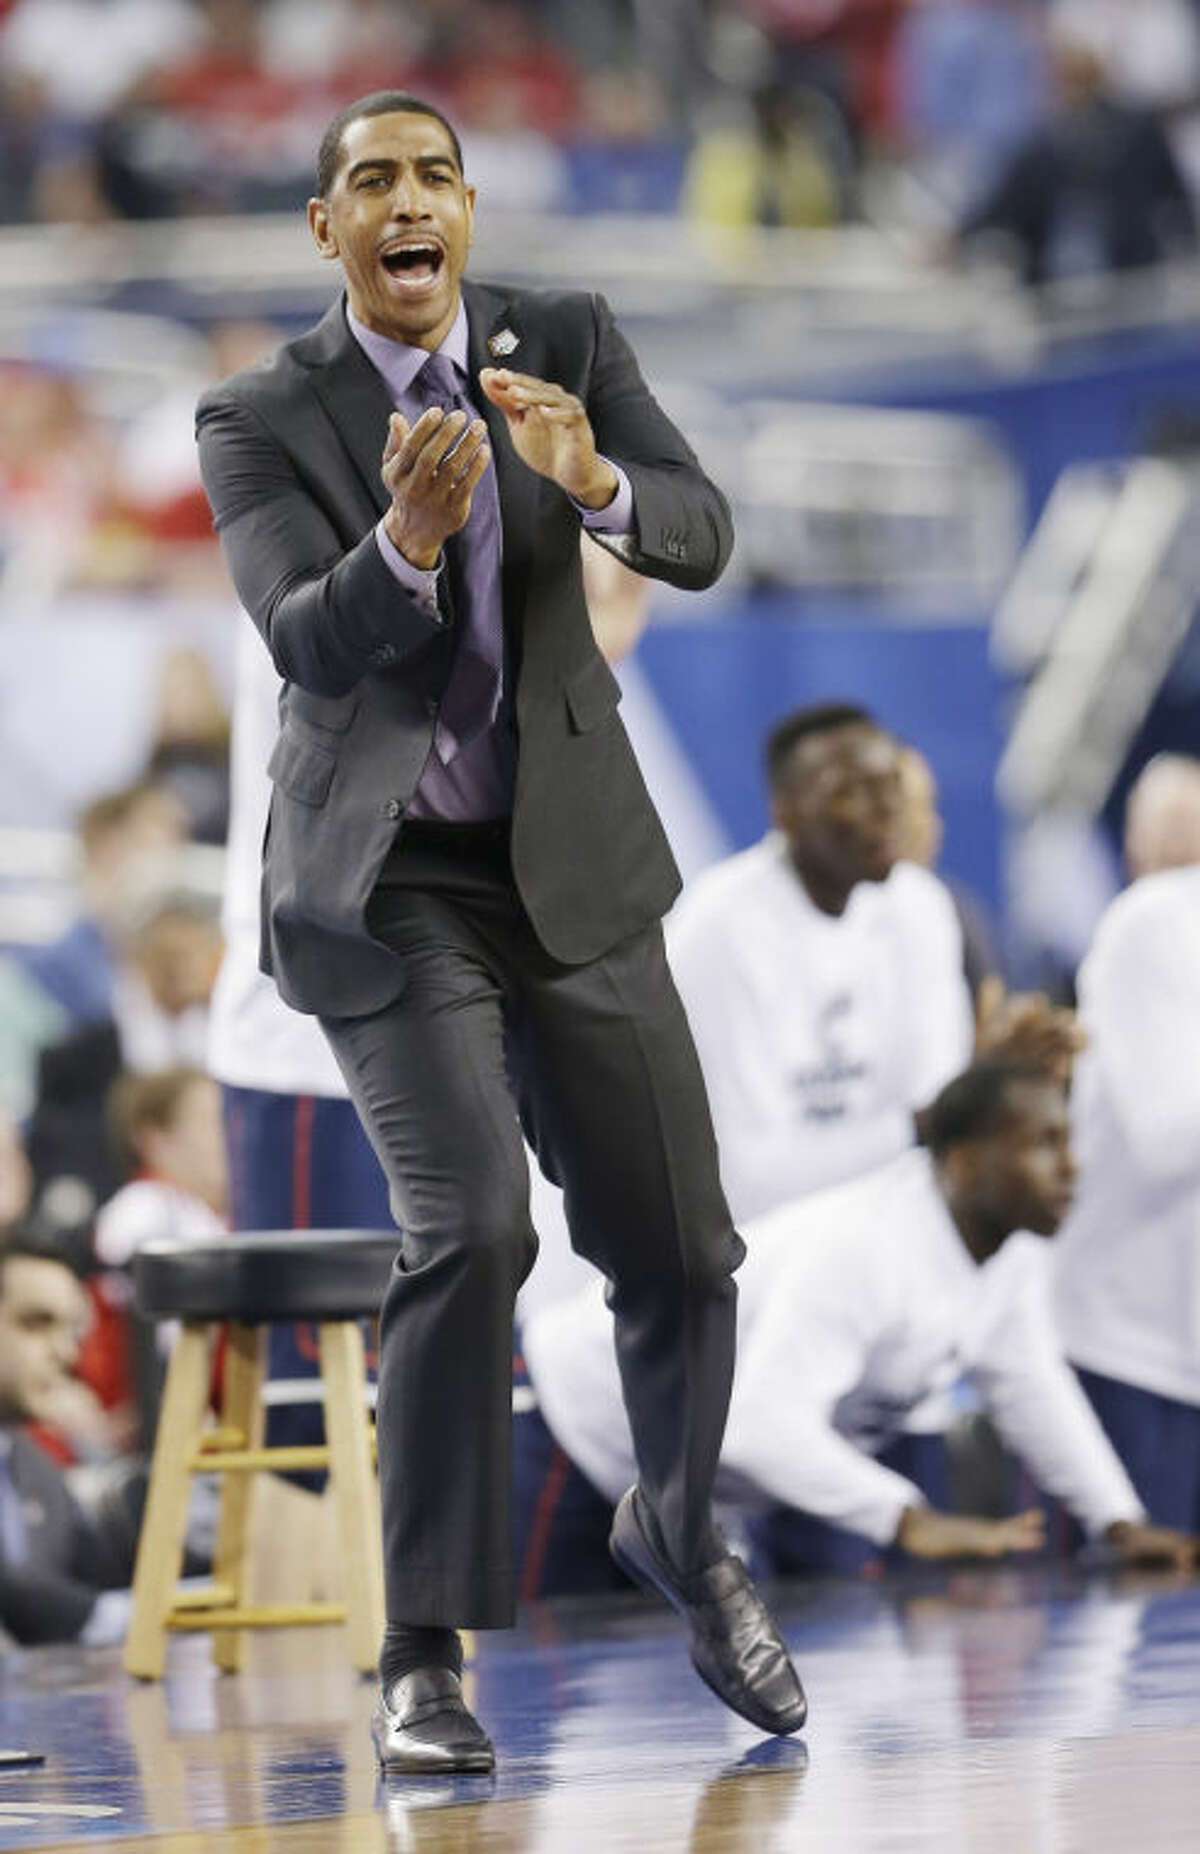 Connecticut head coach Kevin Ollie works the sideline against Florida during the second half of the NCAA Final Four tournament college basketball semifinal game Saturday, April 5, 2014, in Arlington, Texas. (AP Photo/David J. Phillip)